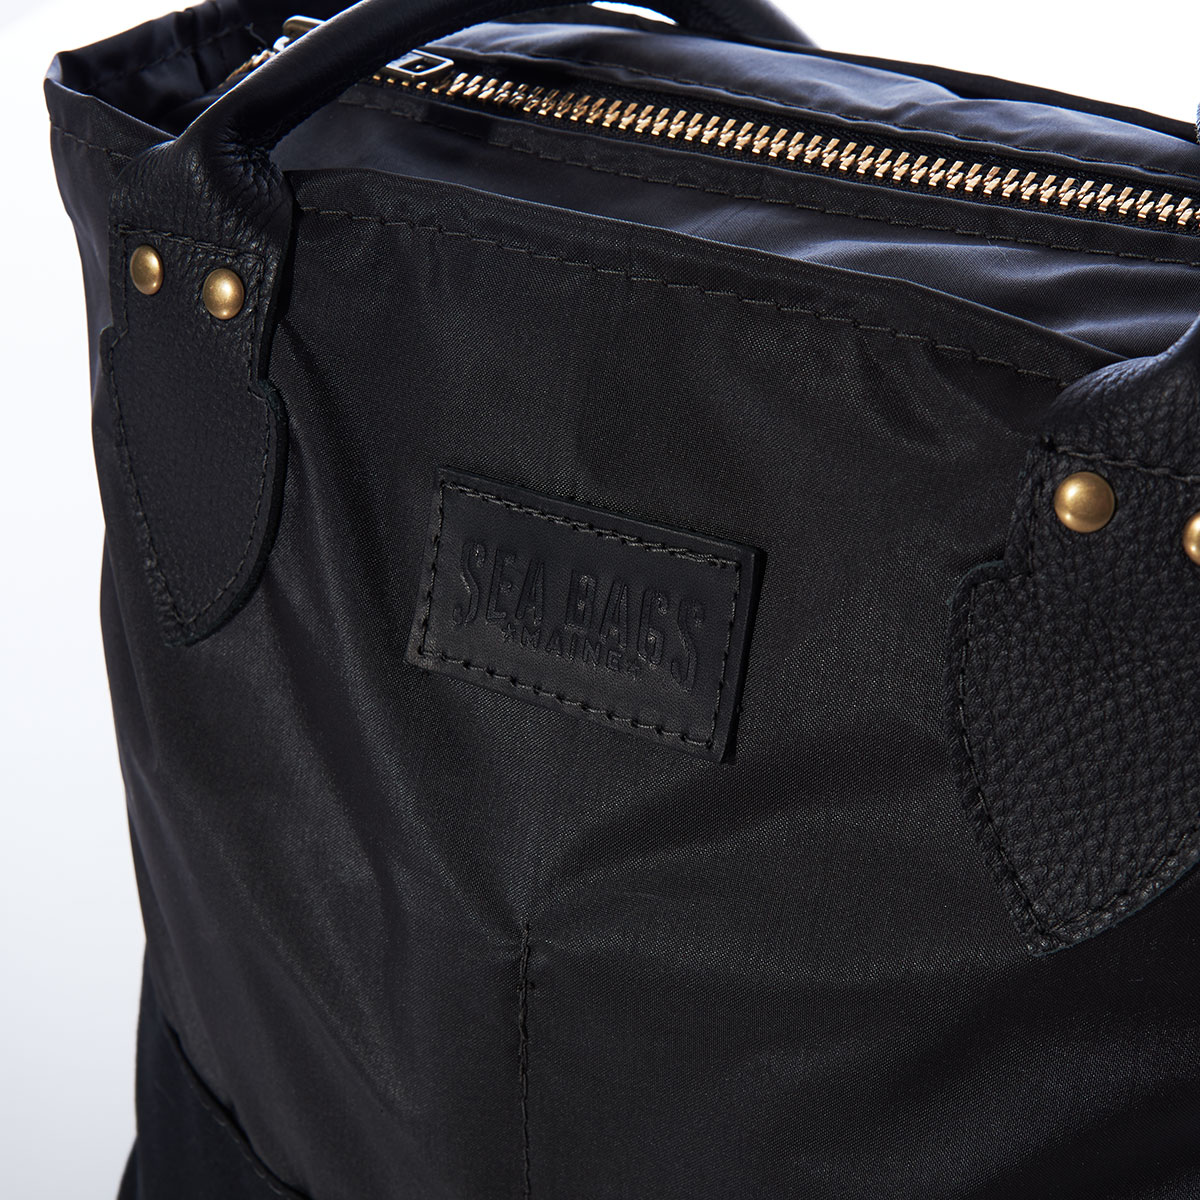 close up view of zipper closure on a black recycled sail cloth handbag with a black canvas bottom and leather handles